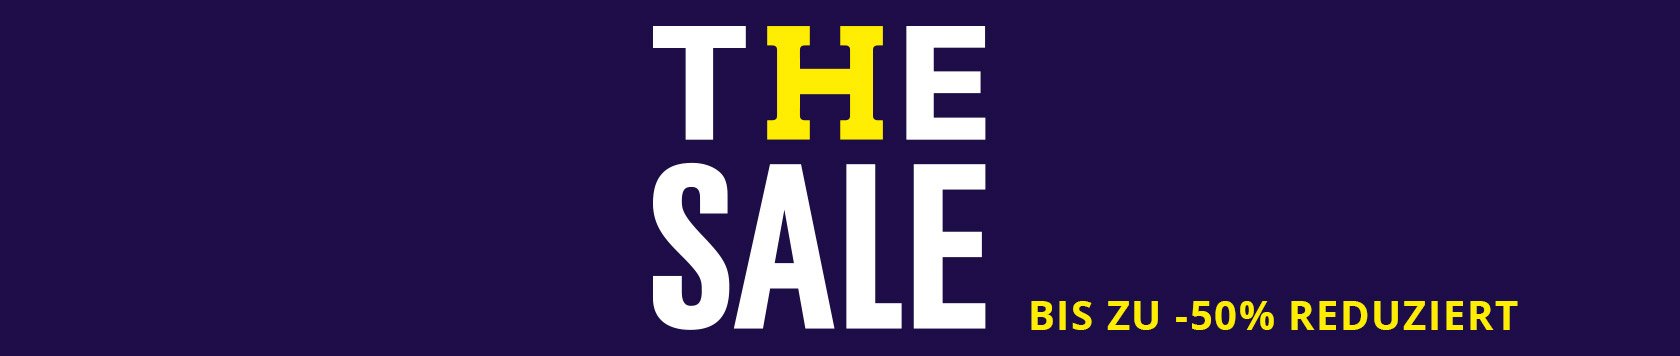 THE SALE